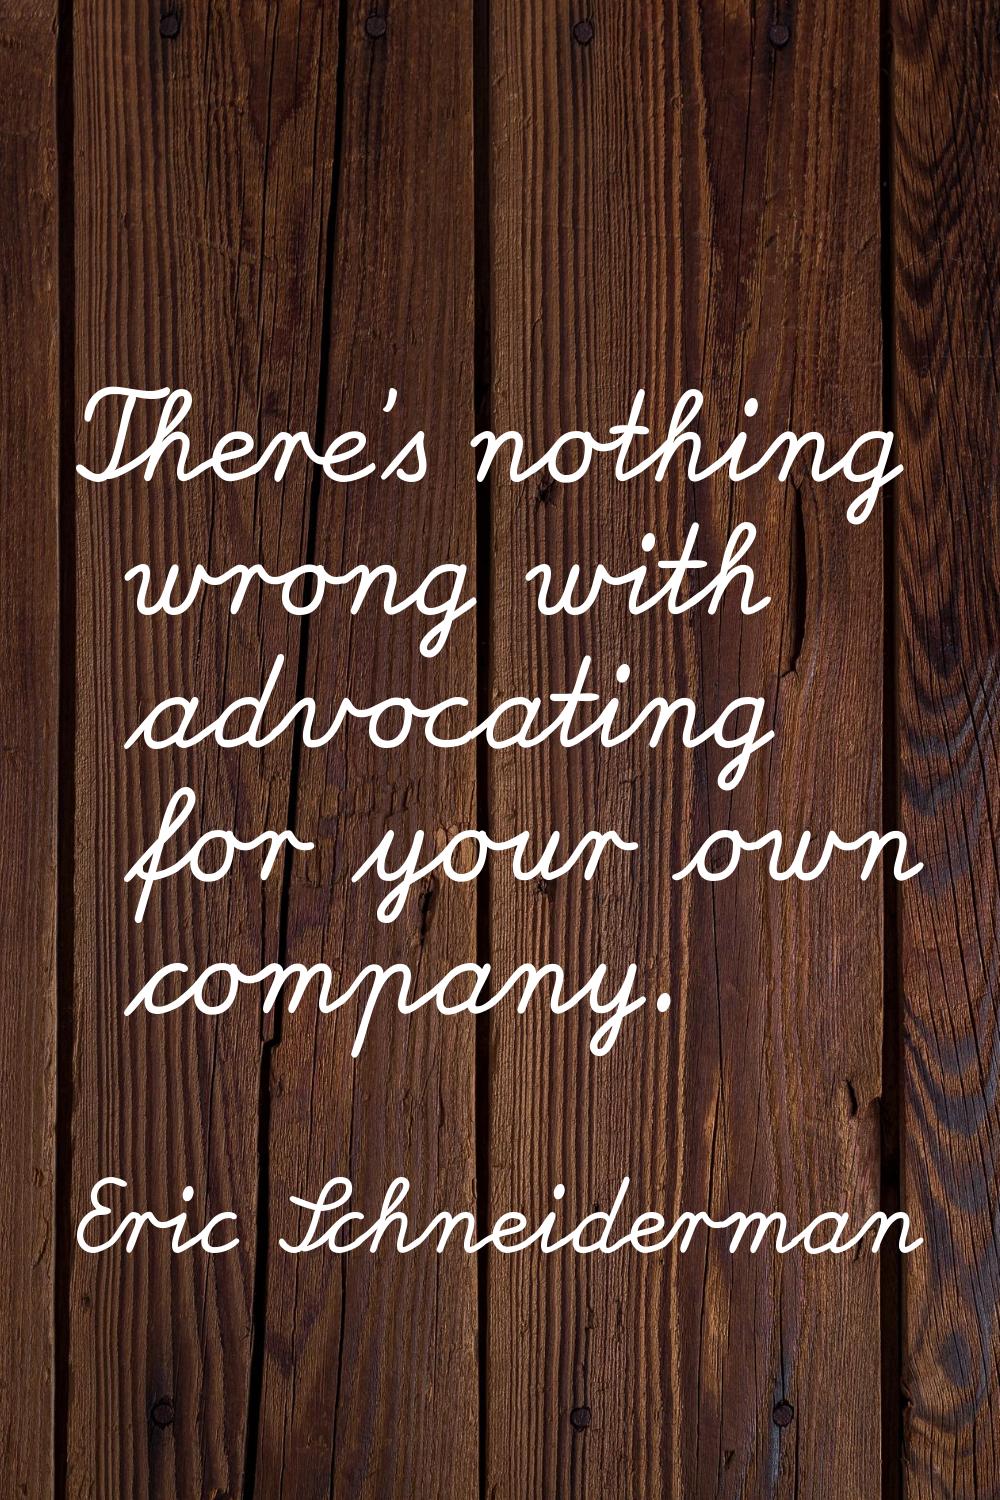 There's nothing wrong with advocating for your own company.